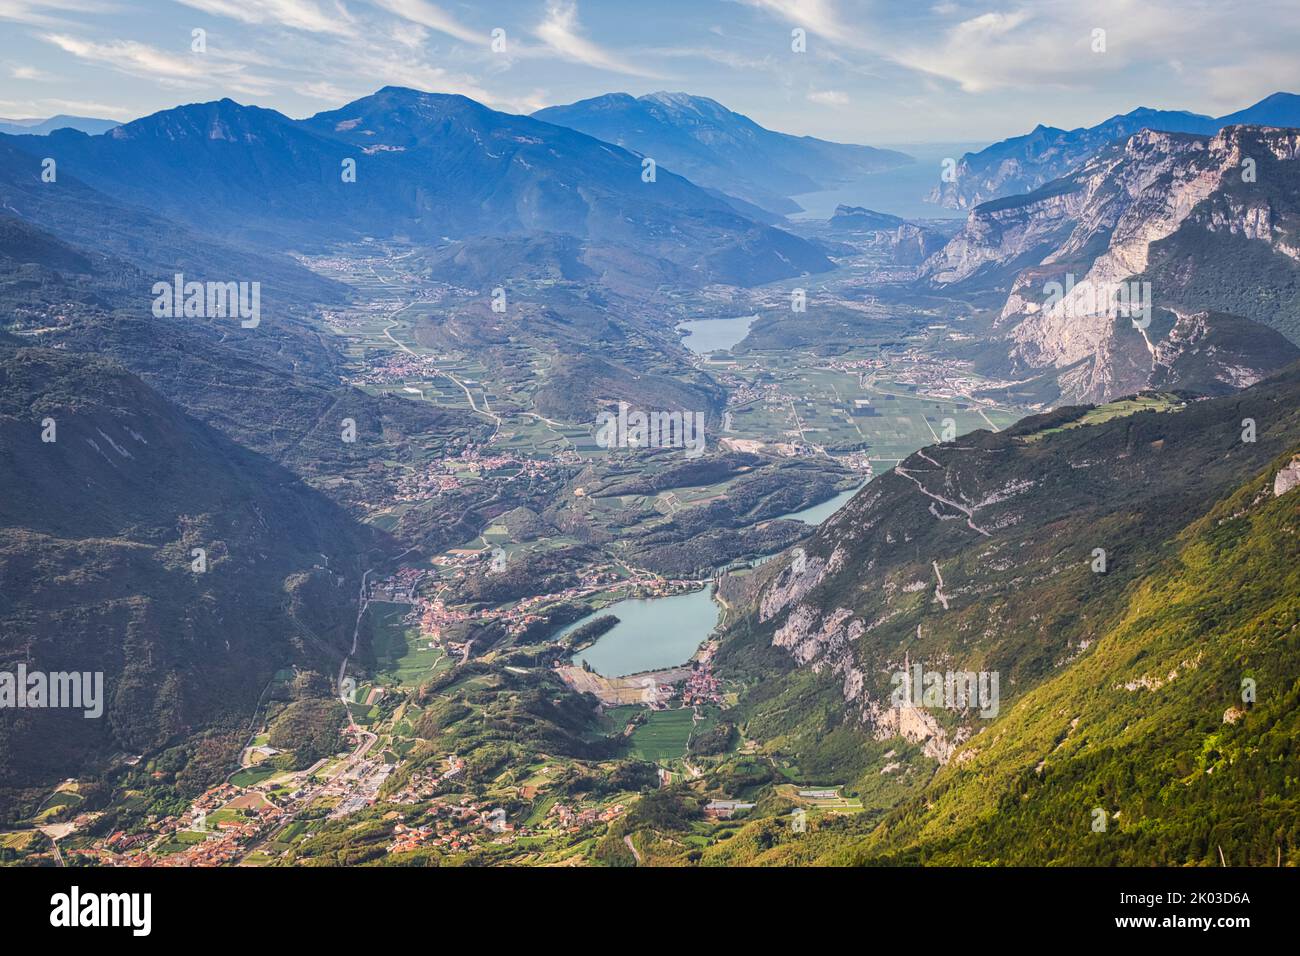 Italy, Trentino, Trento, municipality of Vallelaghi. Elevated view on Valle dei Laghi, subalpine lake district between lake Garda and Trento Stock Photo